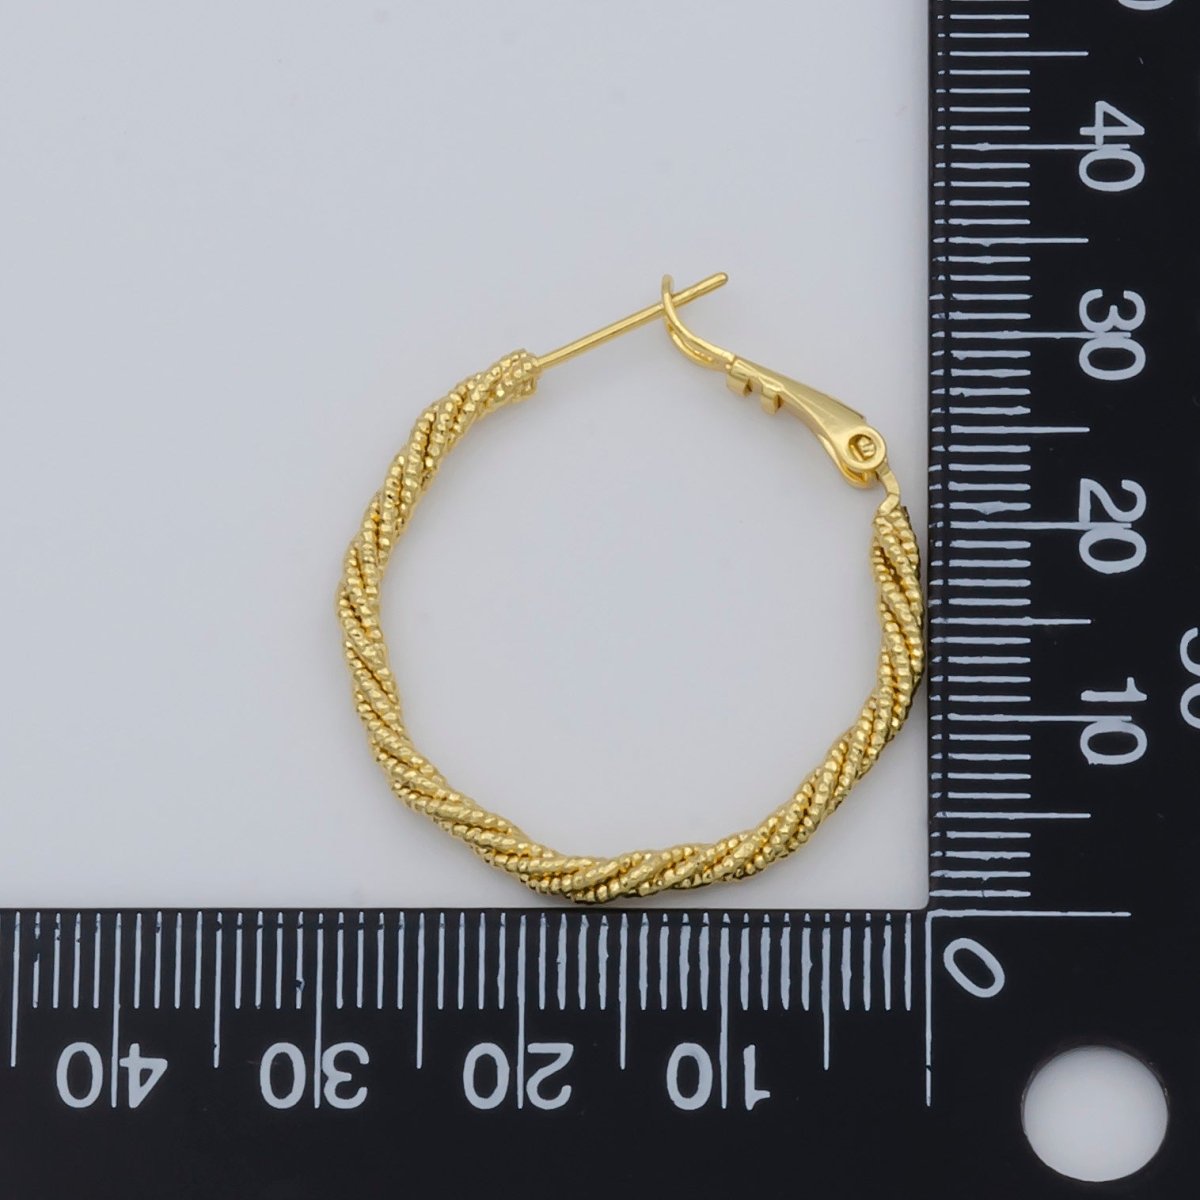 Golden Thin Circle Round Braid Huggies Earrings, Plain Gold Filled Geometric Shape Casual/Formal Daily Earring Jewelry P-107 - DLUXCA